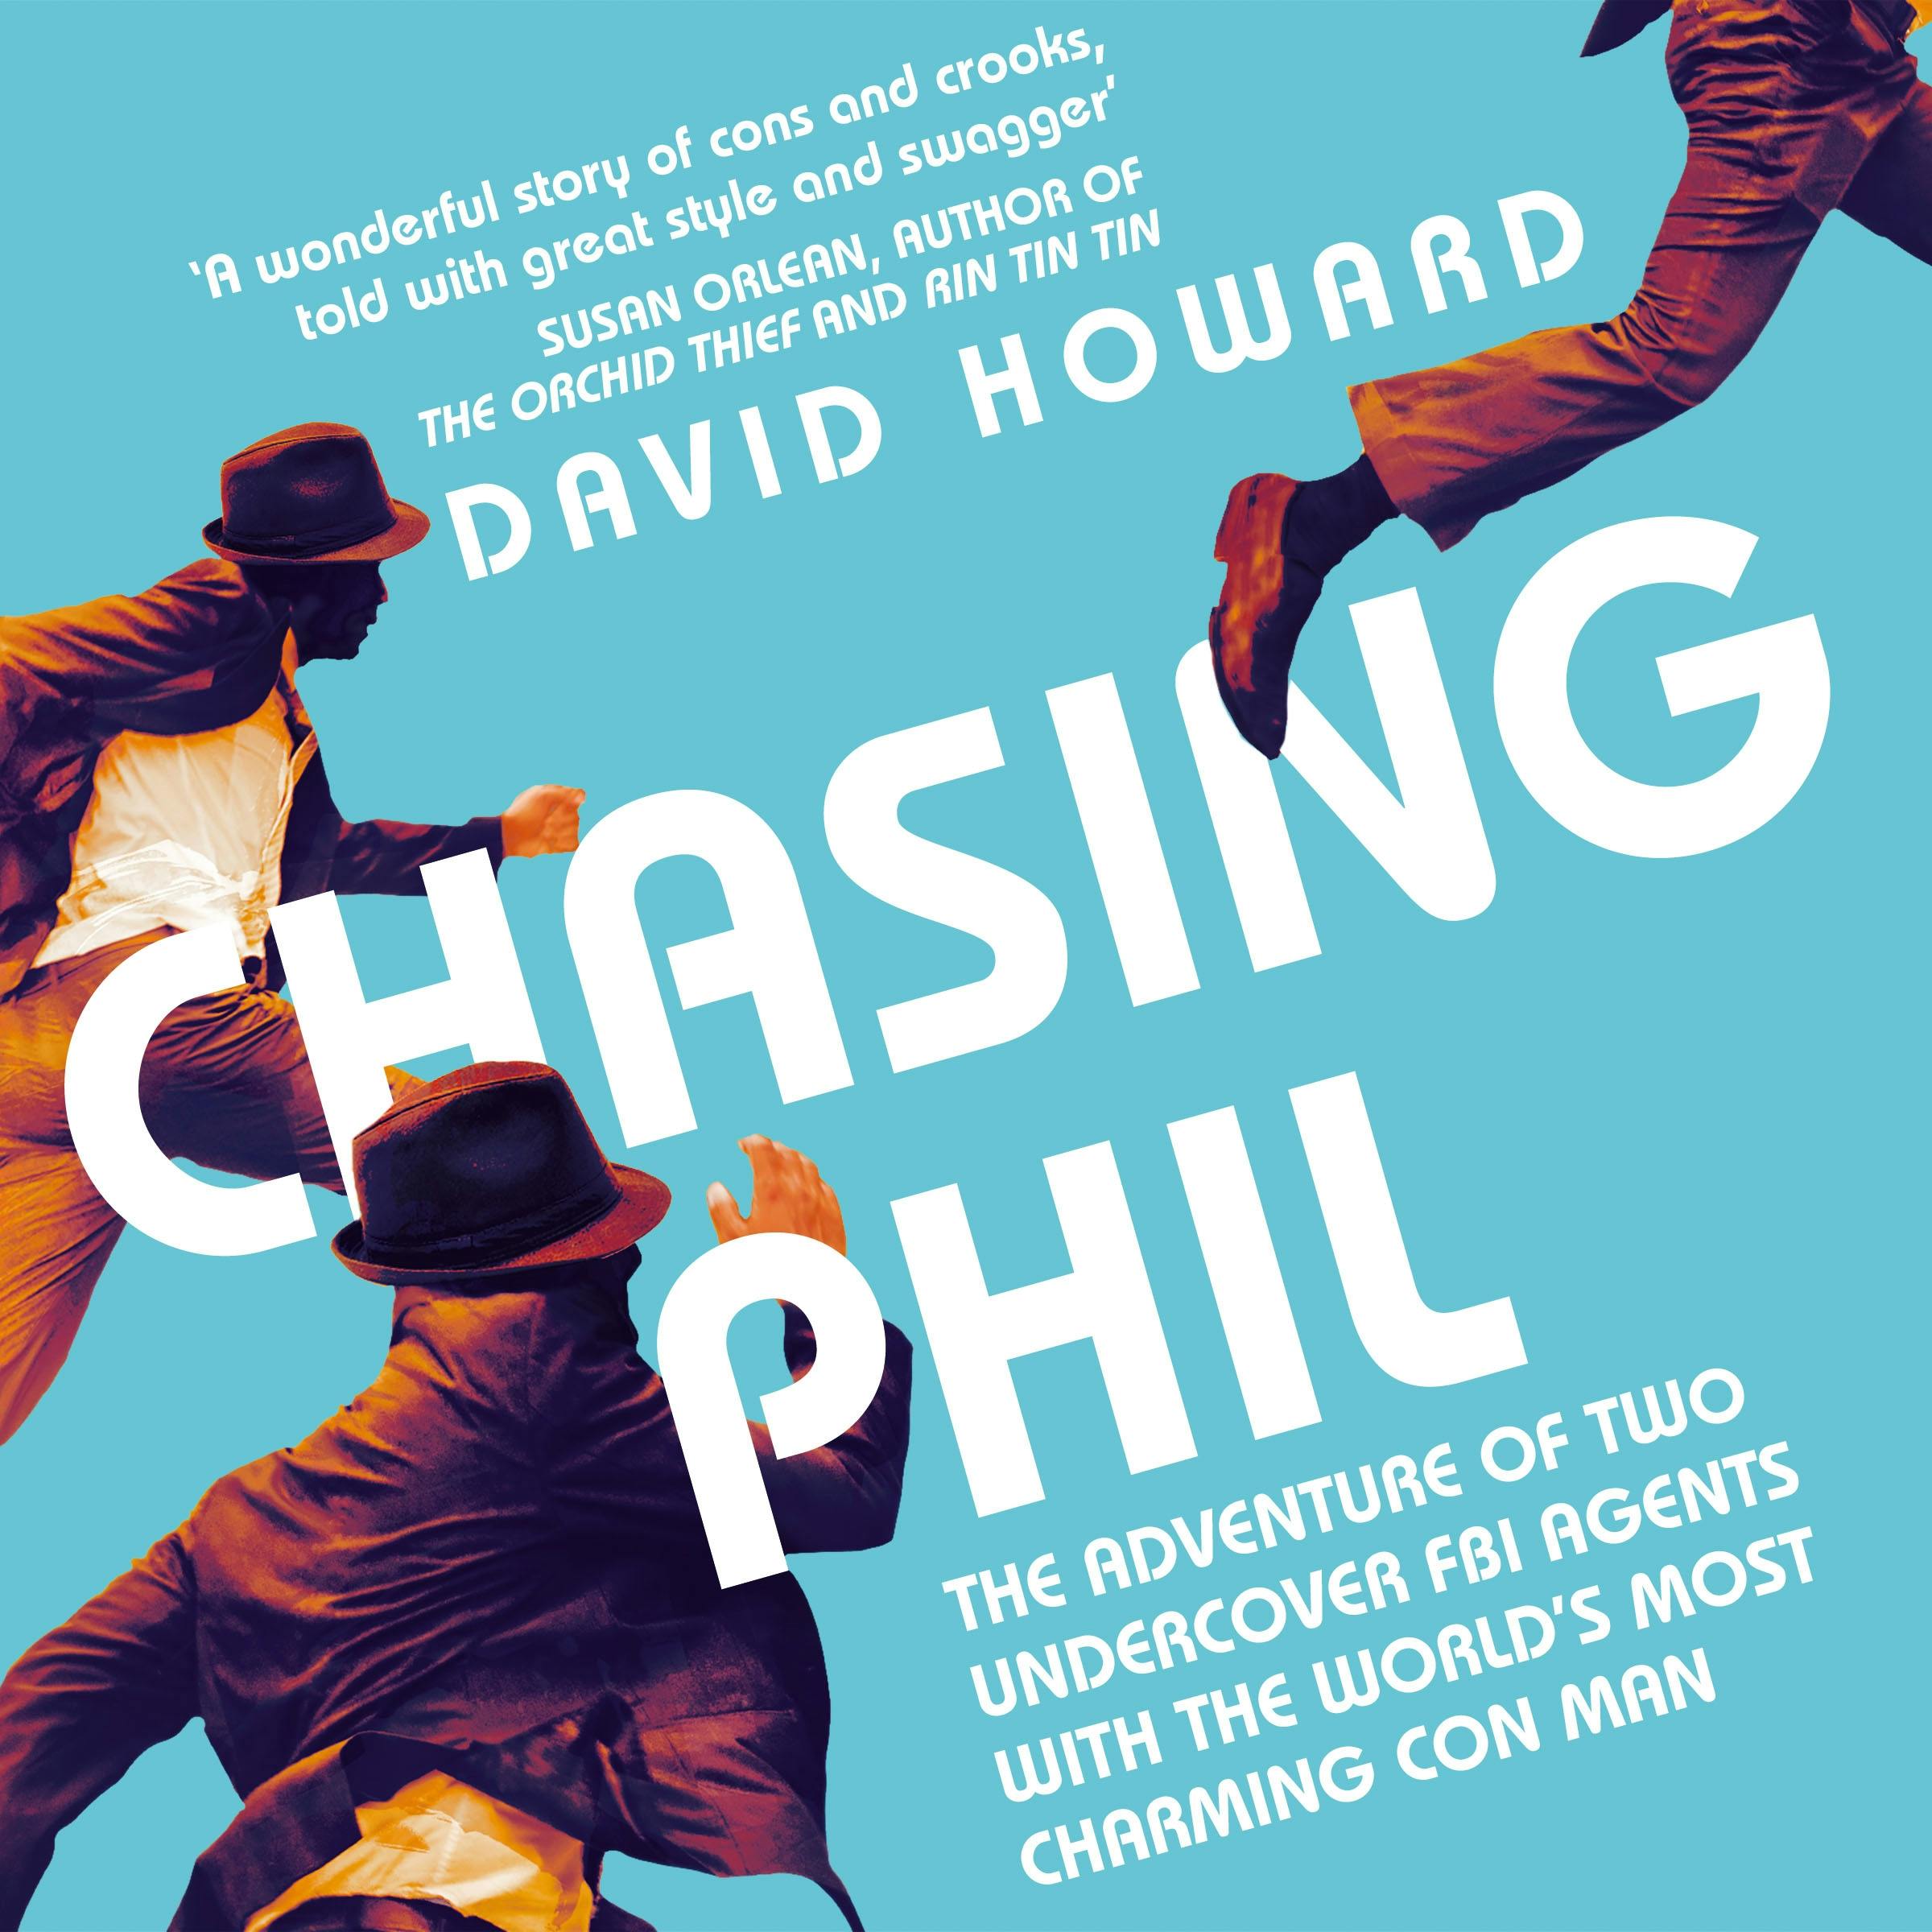 Chasing Phil: The Adventures Of Two Undercover FBI Agents With The